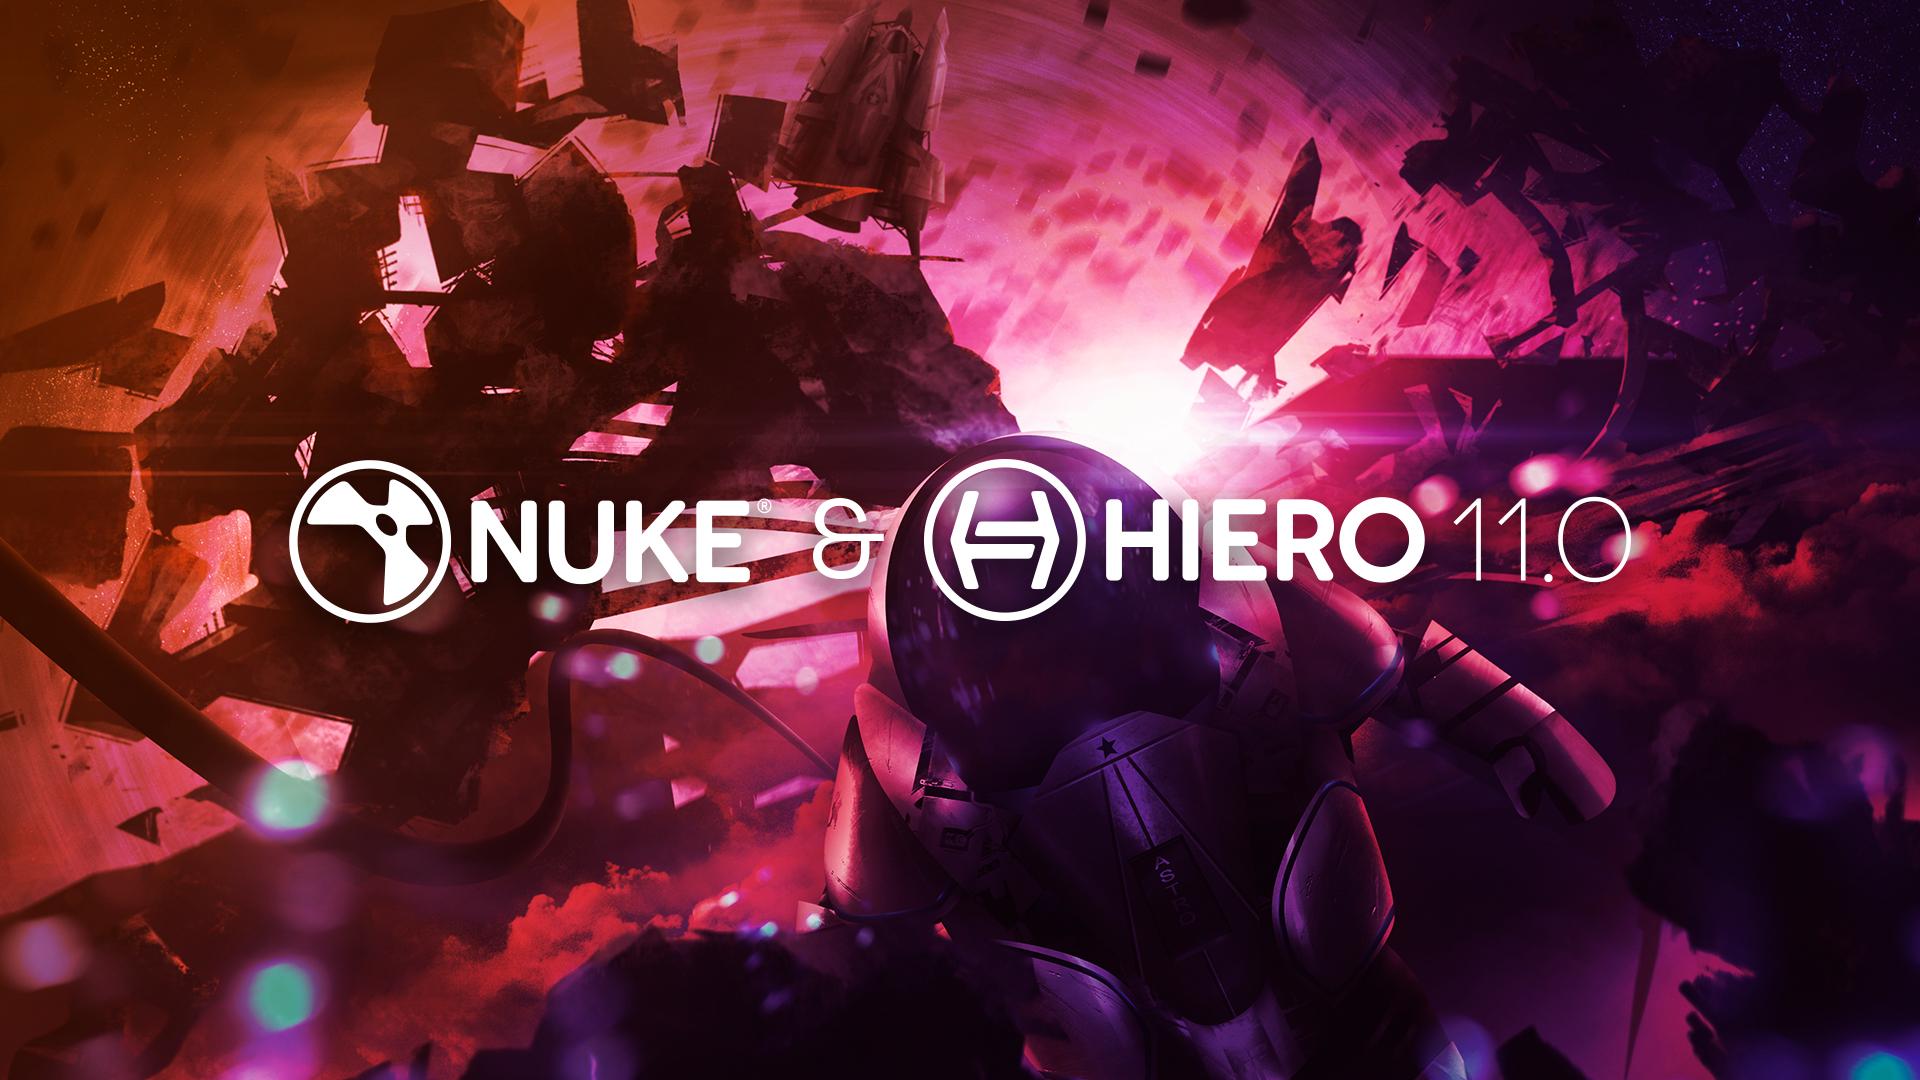 Hiero and Nuke 11 releases